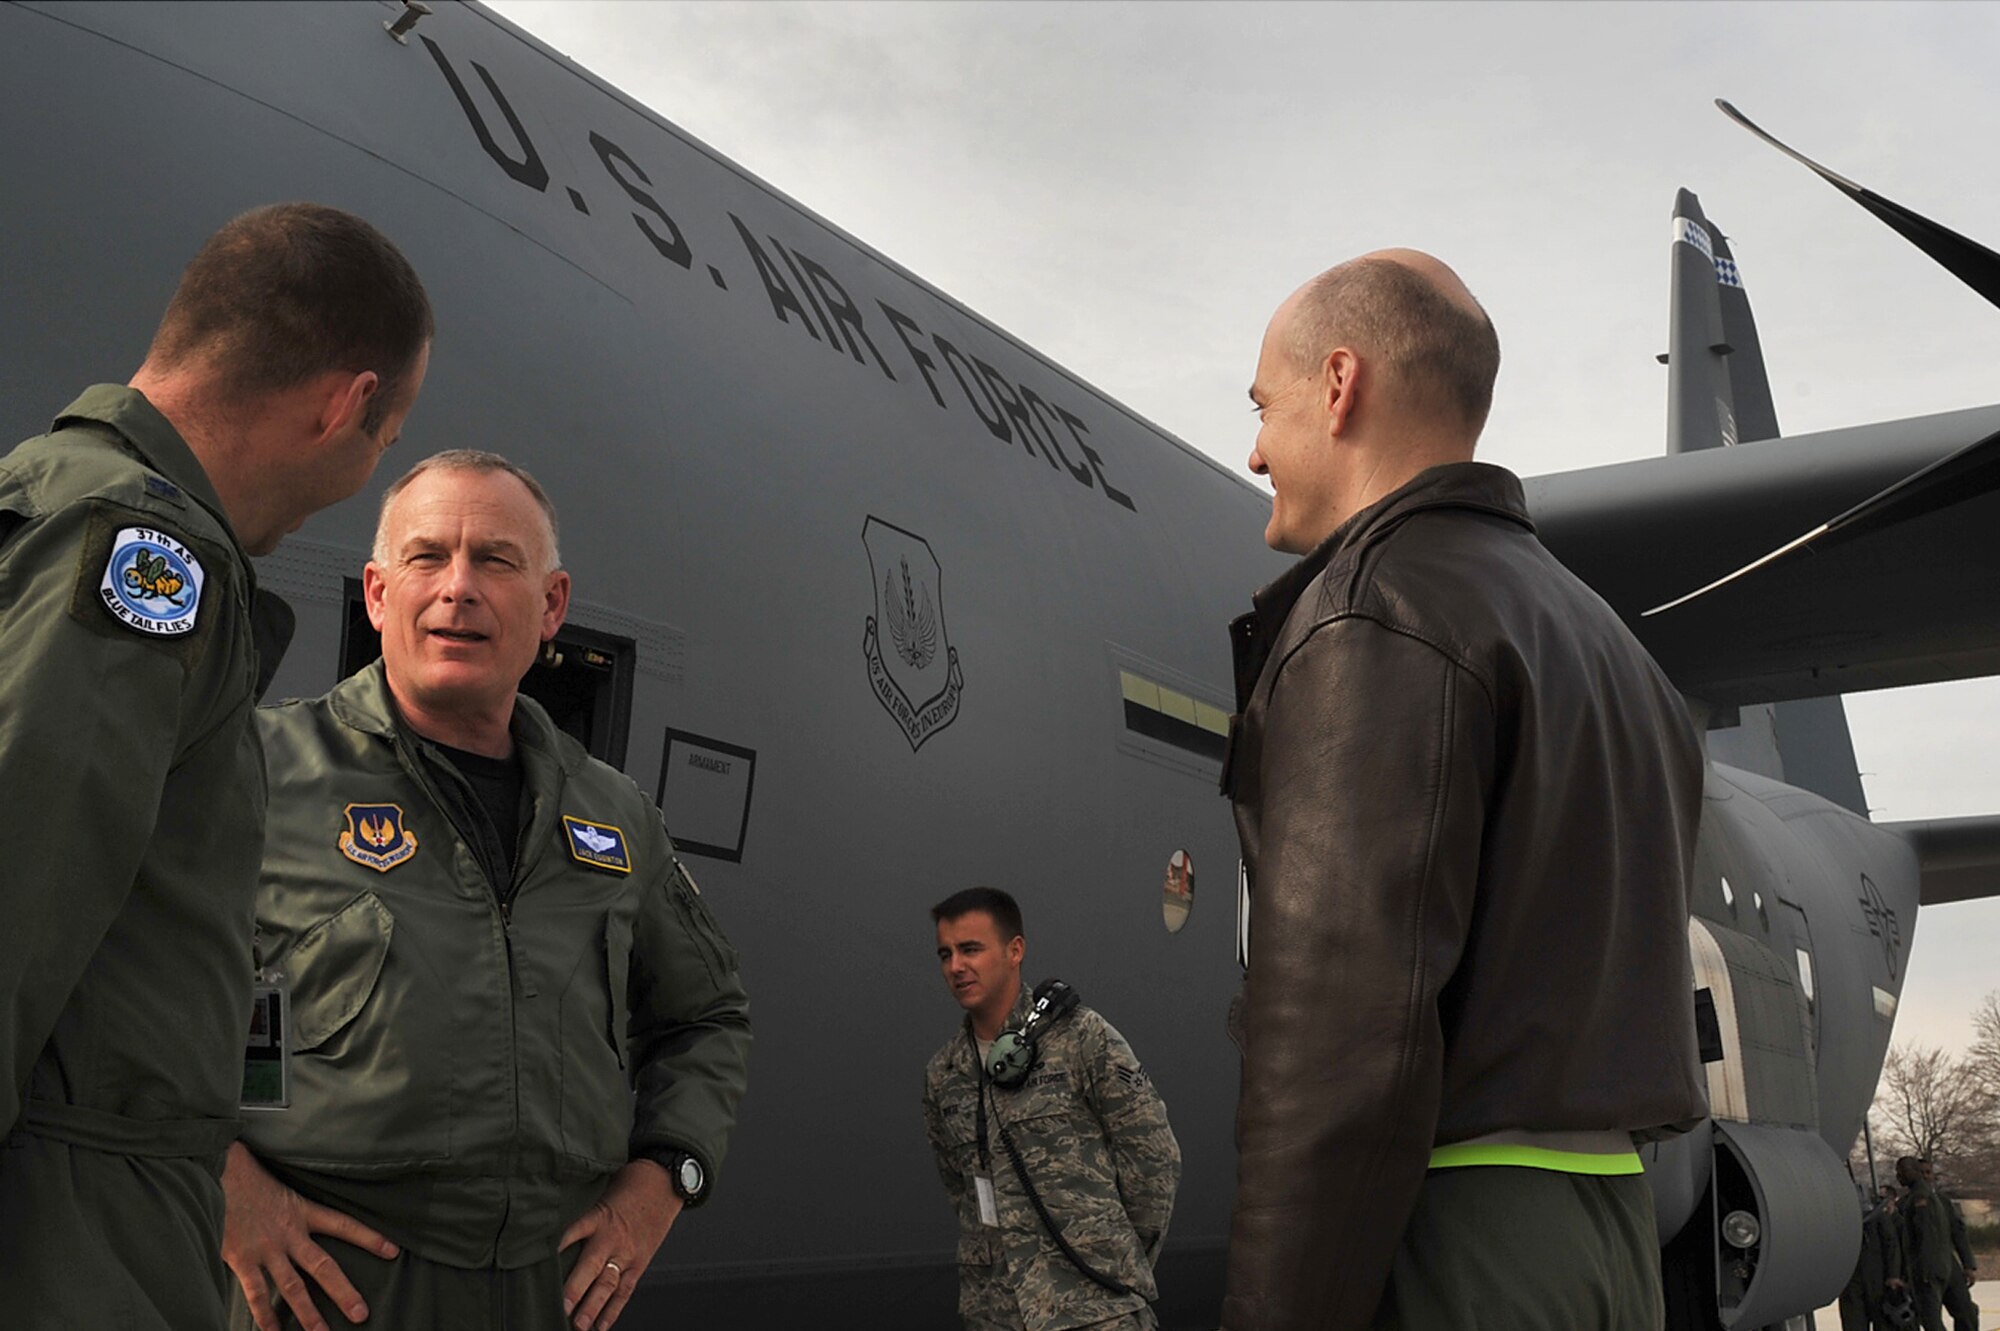 Maj. Gen. Jack Egginton, Director, Air and Space Operations, Headquarters U.S. Air Forces in Europe, talks with Lt.Col. Matt Wehner (left), Director of Operations, 37th Airlift Squadron, and Col. Tim Budd (right), Commander, 86th Operations Group, beside Ramstein's newly delivered 13th C-130J Super Hercules, Ramstein Air Base, Germany, March 30, 2010. Fourteen C-130J models will be assigned to Ramstein, replacing the older C-130Es as a part of the Air Force’s priority to revitalize the aircraft fleet. (U.S. Air Force photo by Senior Airman Tony R. Ritter)